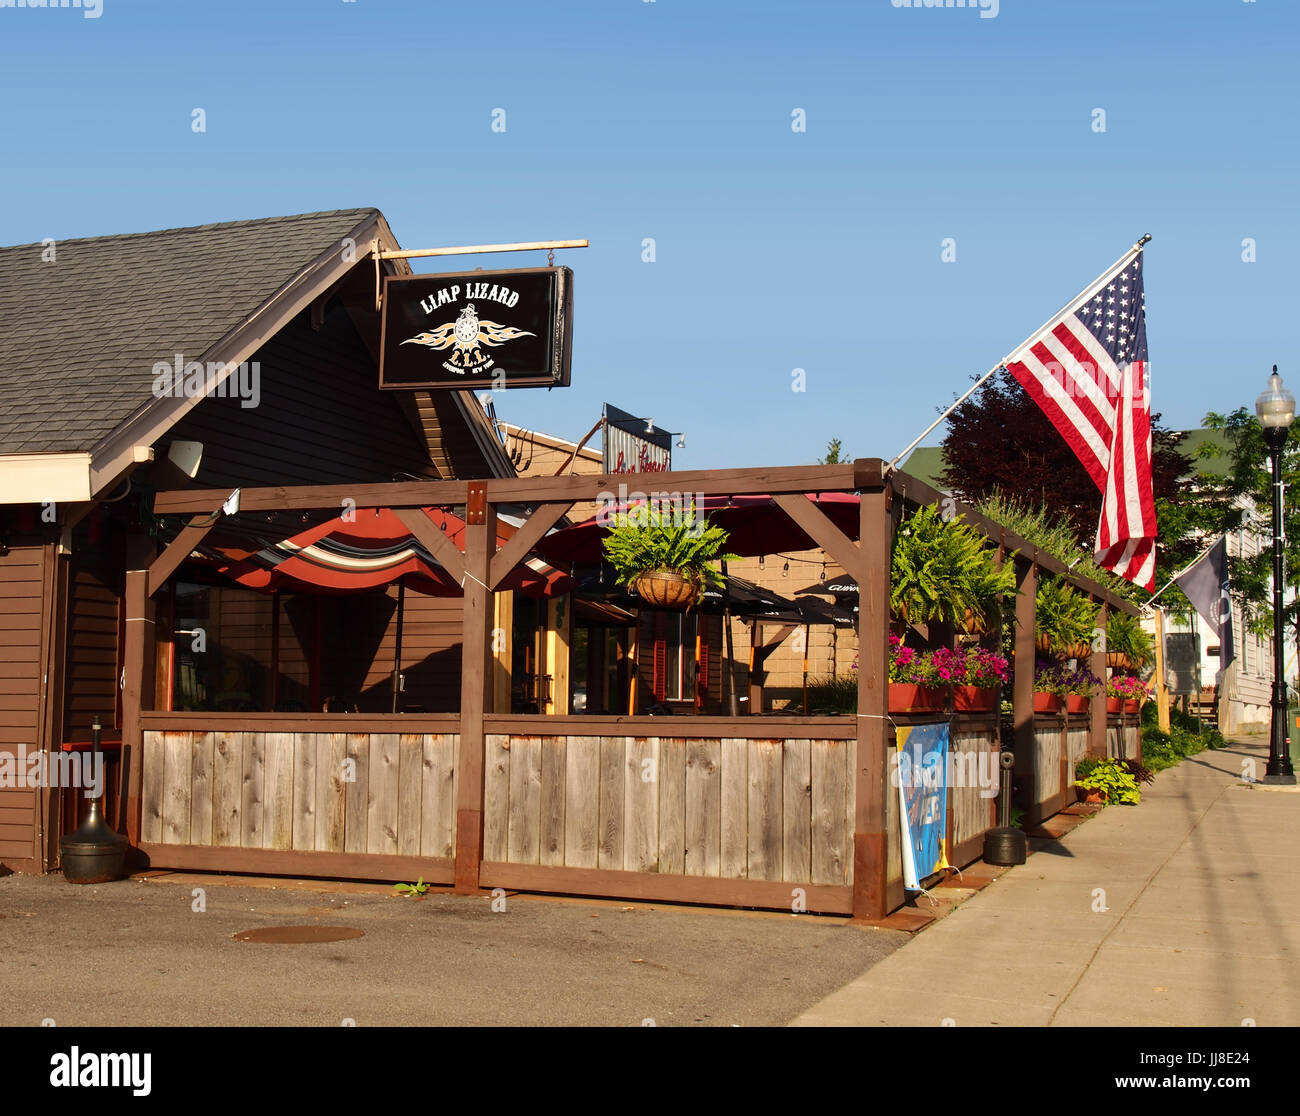 Liverpool, New York, USA. July 18, 2017. Exterior of the  Limp Lizard  Bar and Grill in the village of Liverpool, New York before opening . Popular ba Stock Photo